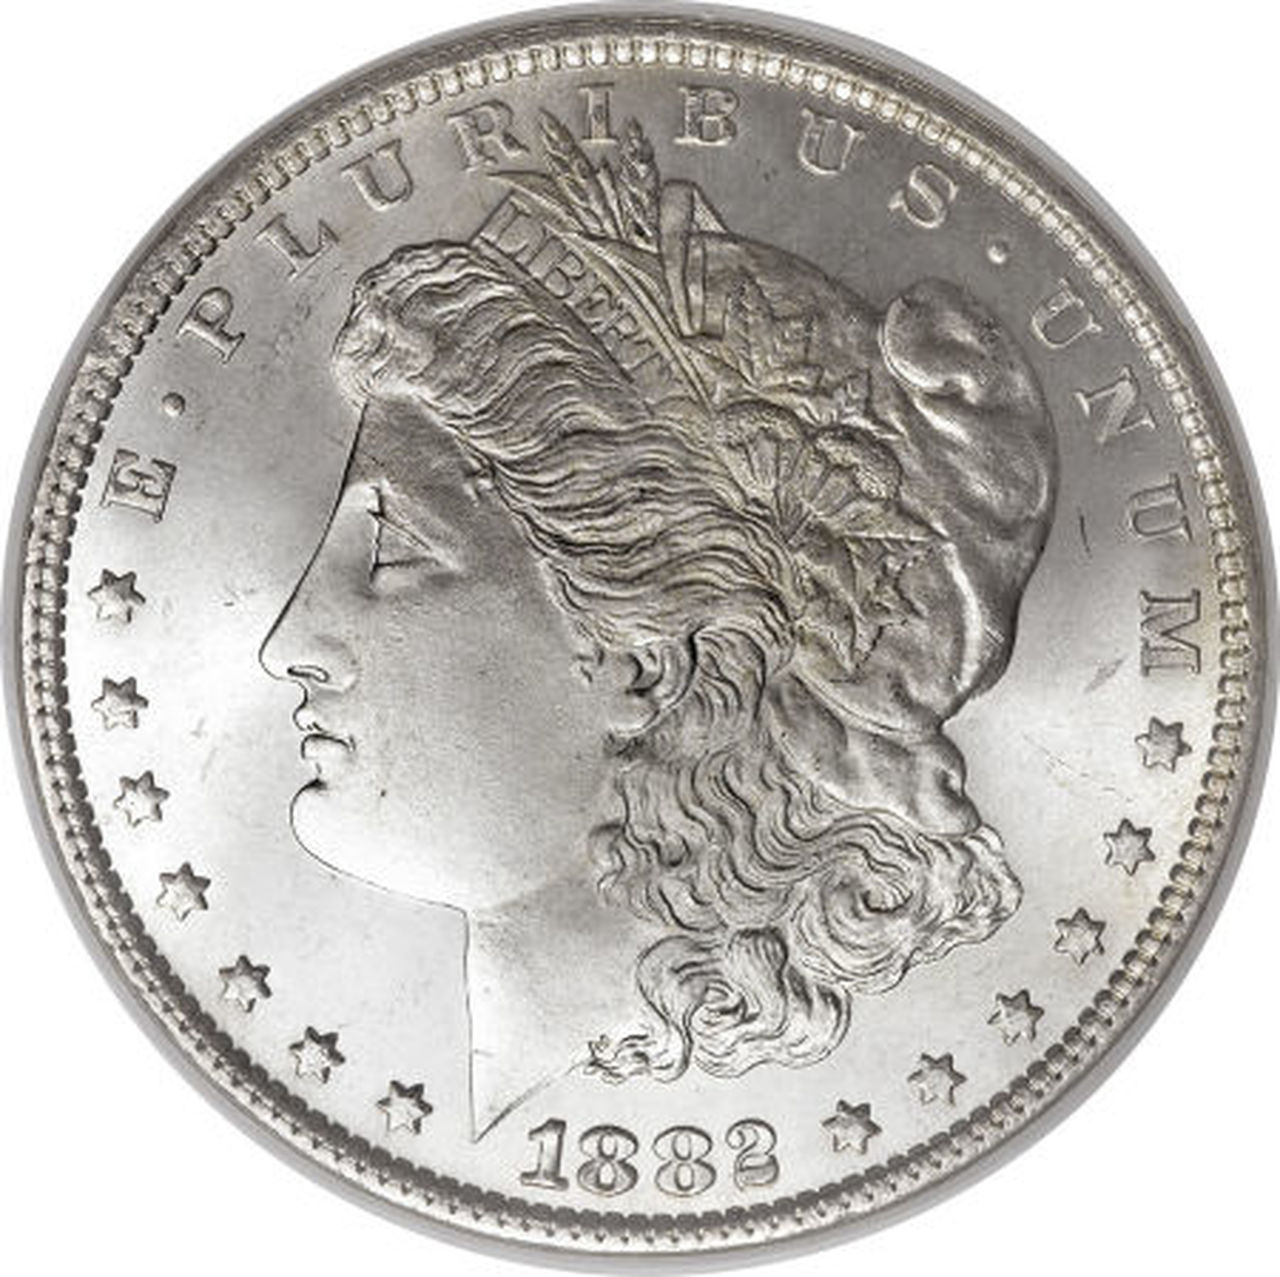 How much is a 1882 silver dollar worth